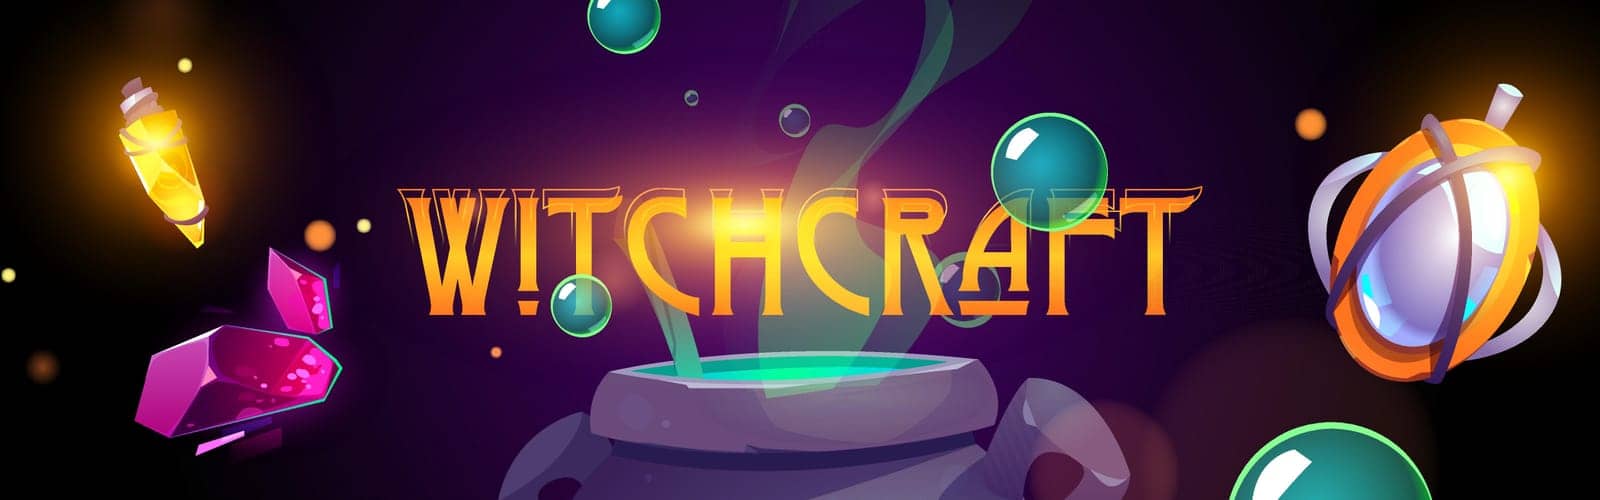 Witchcraft cartoon banner with magician witch cauldron, bubbles, crystal and amulets. Background for computer game, Halloween party, wizard, alchemy magic school education concept, Vector illustration